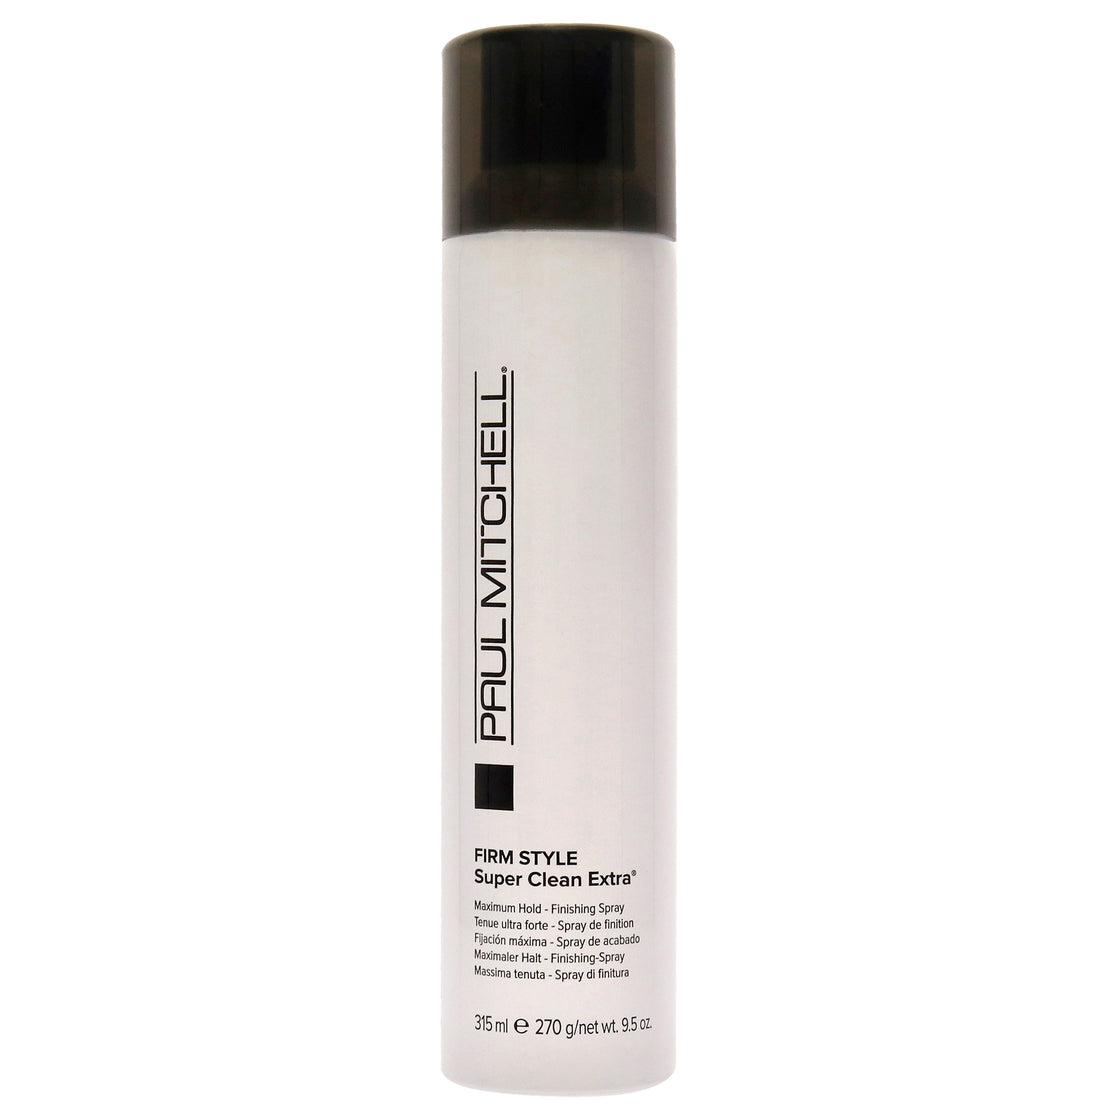 Super Clean Extra Finishing Spray - Firm Style by Paul Mitchell for Unisex - 9.5 oz Hair Spray